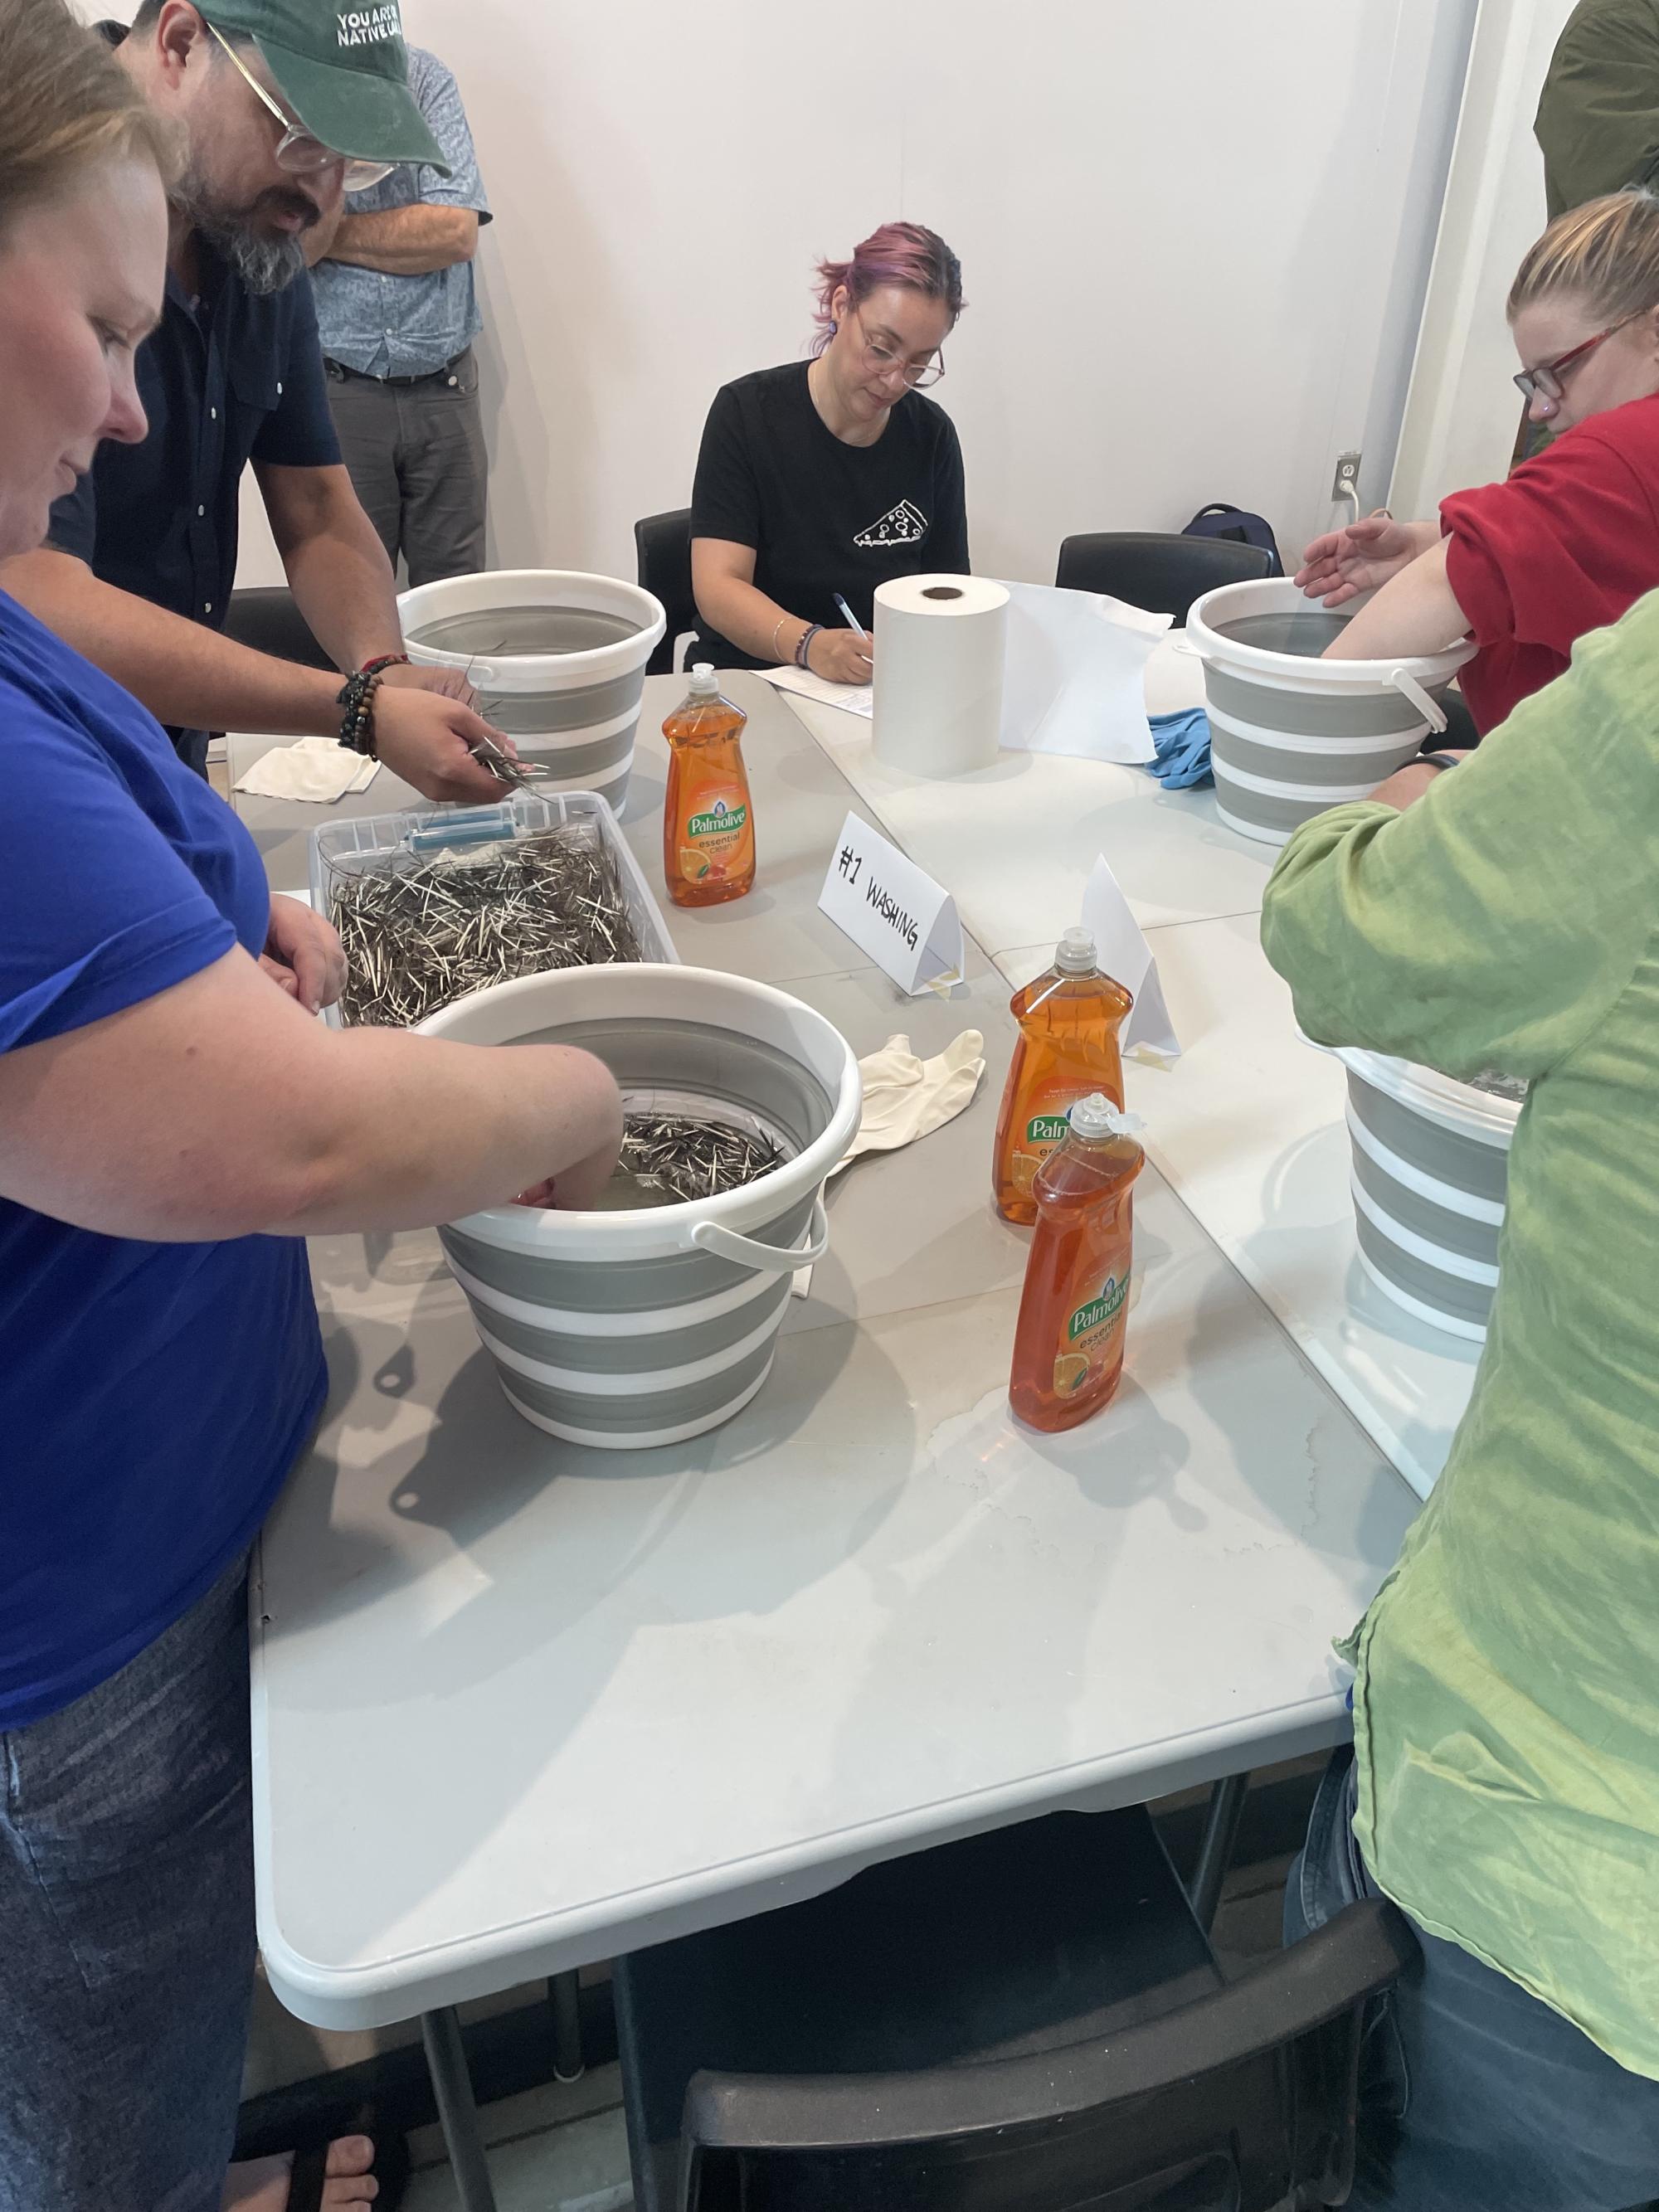 [ID: "Workshop participants washing porcupine quills in buckets of warm soapy water to prepare to make quillwork art."] 